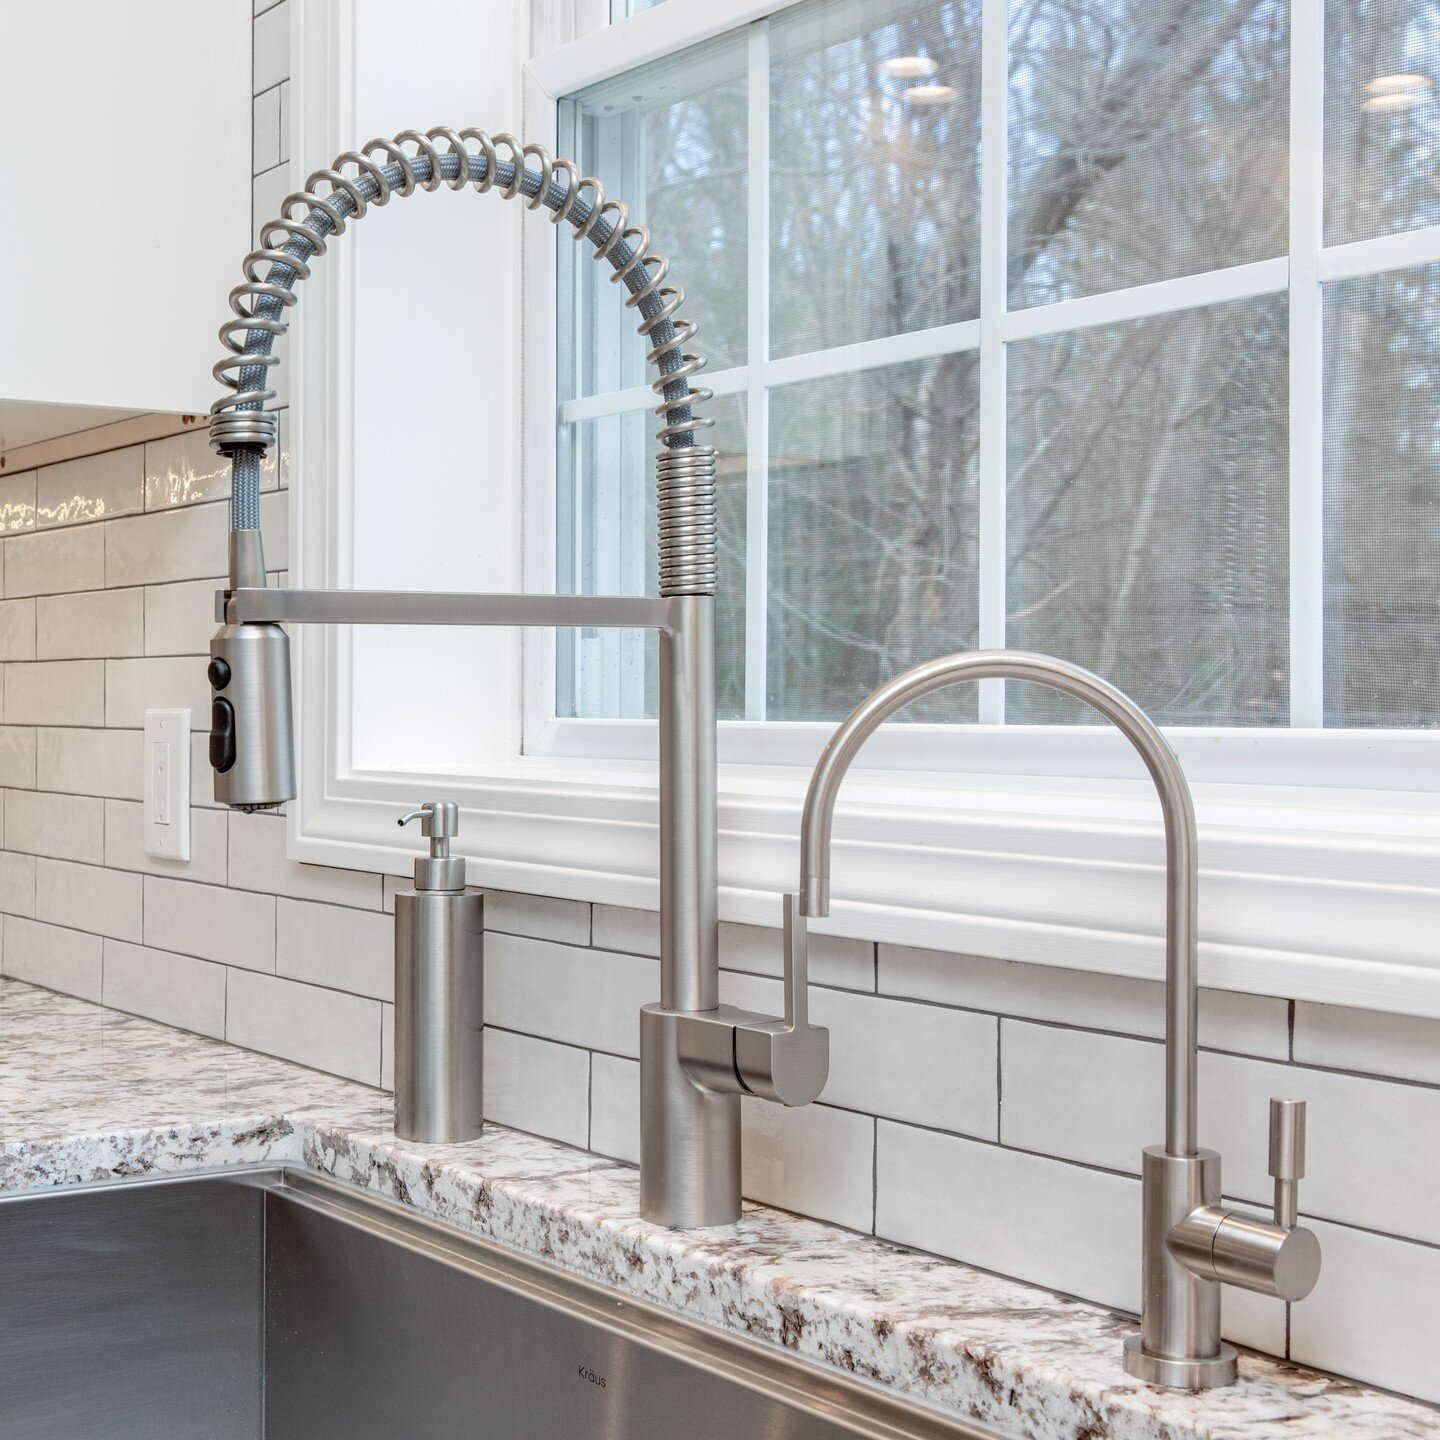 This was a &quot;must-have&quot; for our client! He always dreamed of an industrial-style Sink Faucet! He loves it!